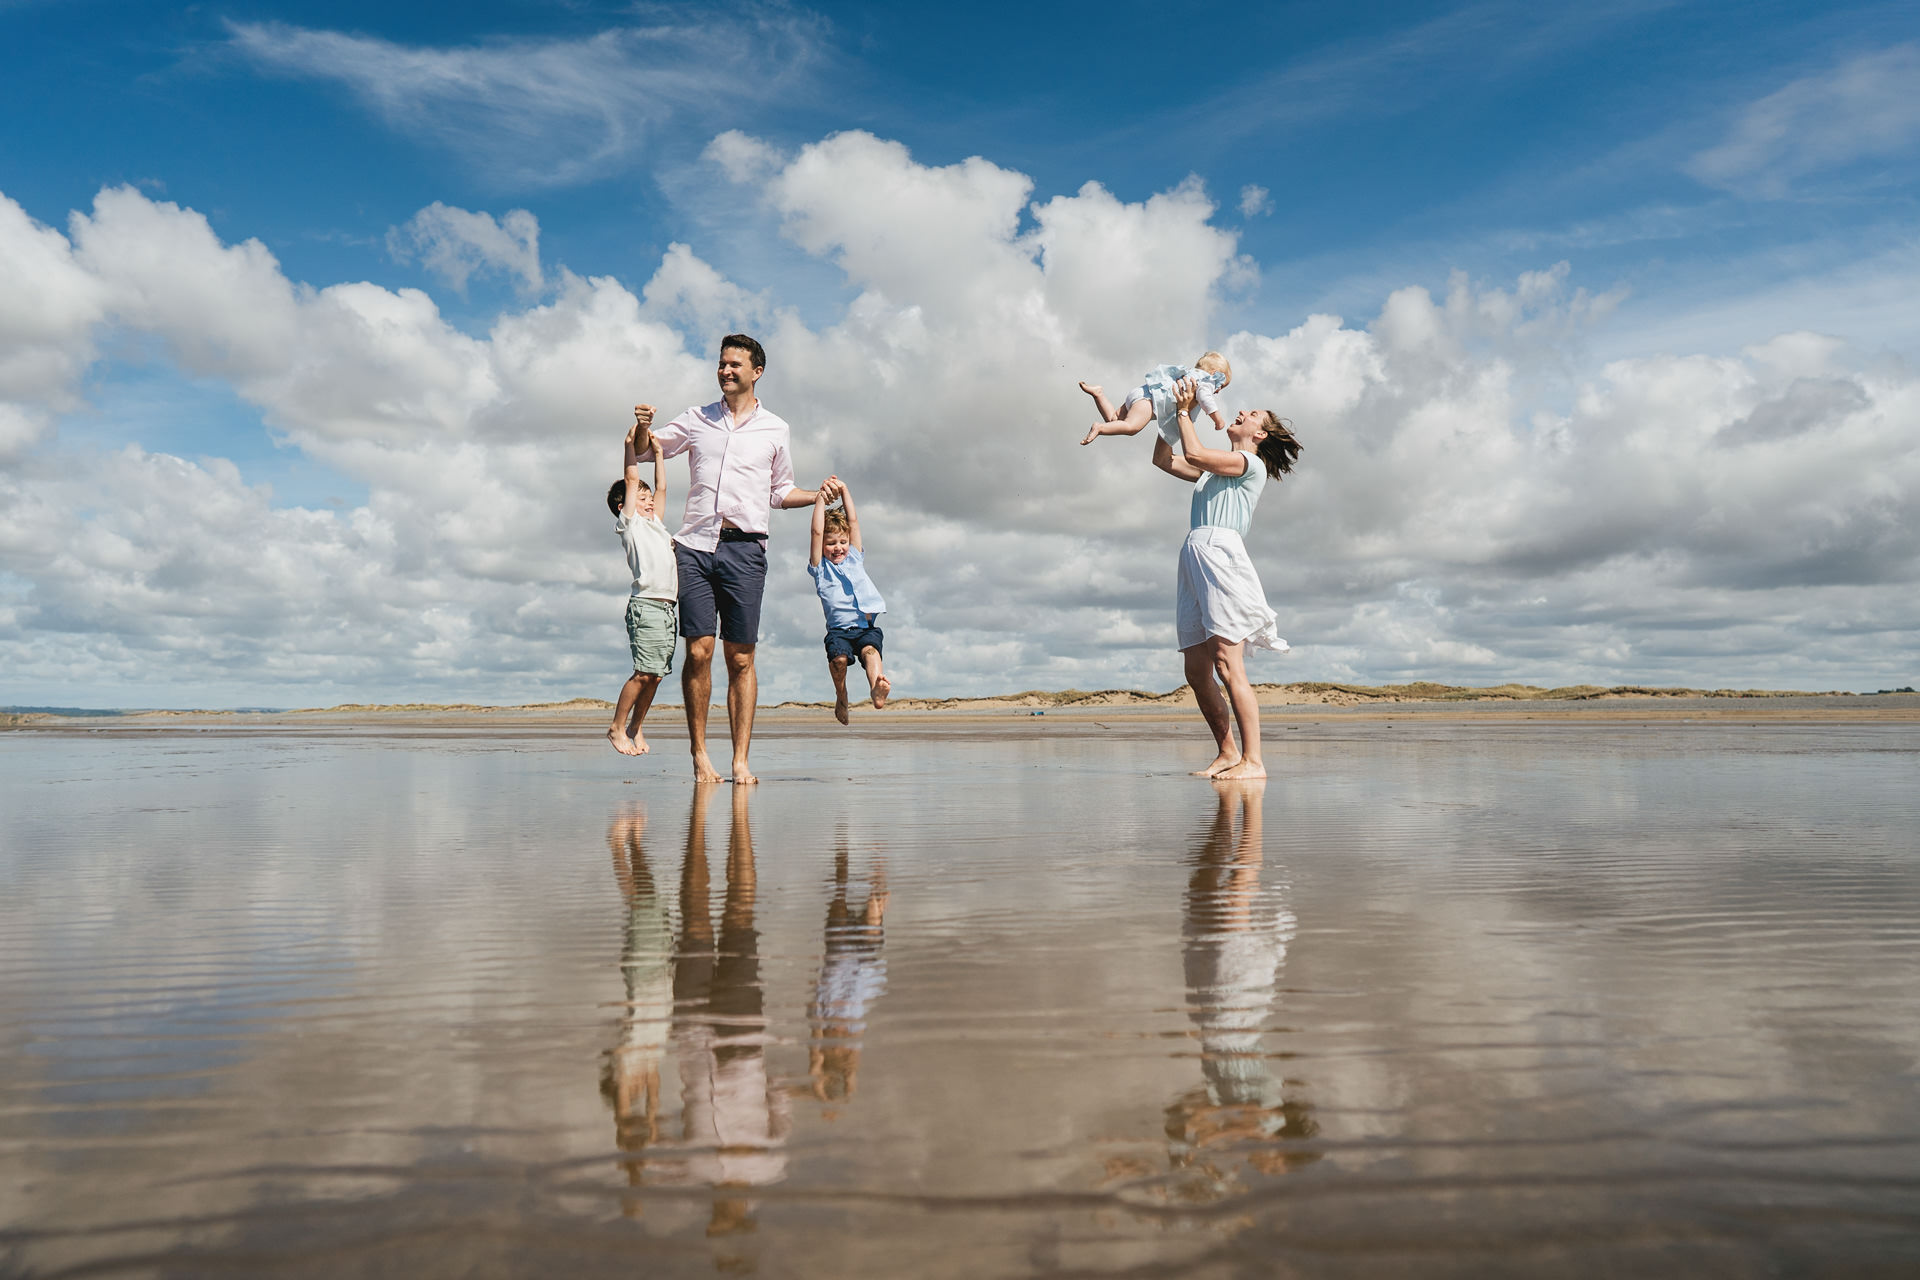 A family photography session on the beach at Westward Ho! with parents swinging three children in the air and blue skies